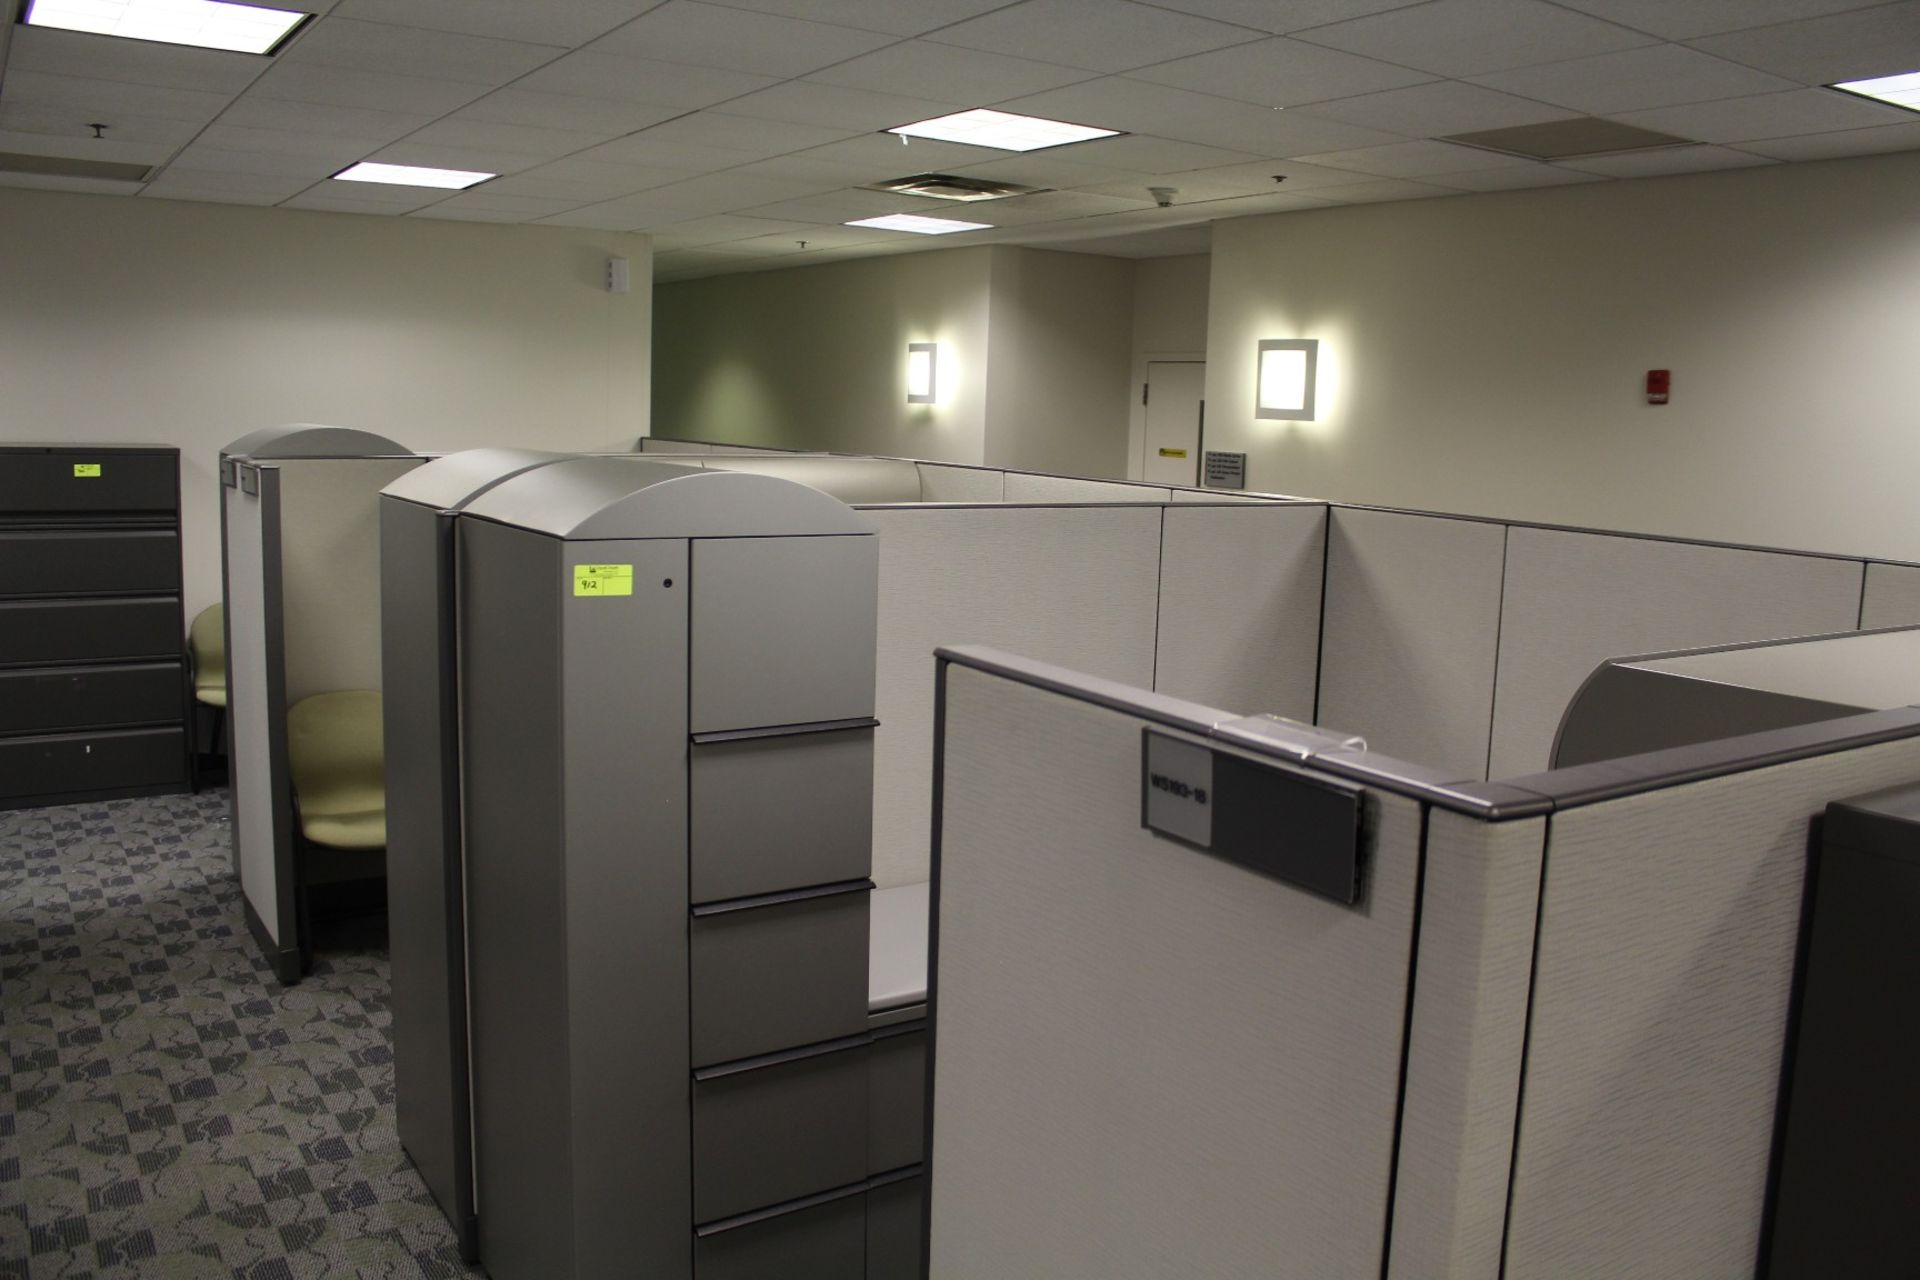 Cubicle Office System, W/ (3) Work Stations, Chairs, File Cabinets, Storage Cabinets & Cubicle Walls